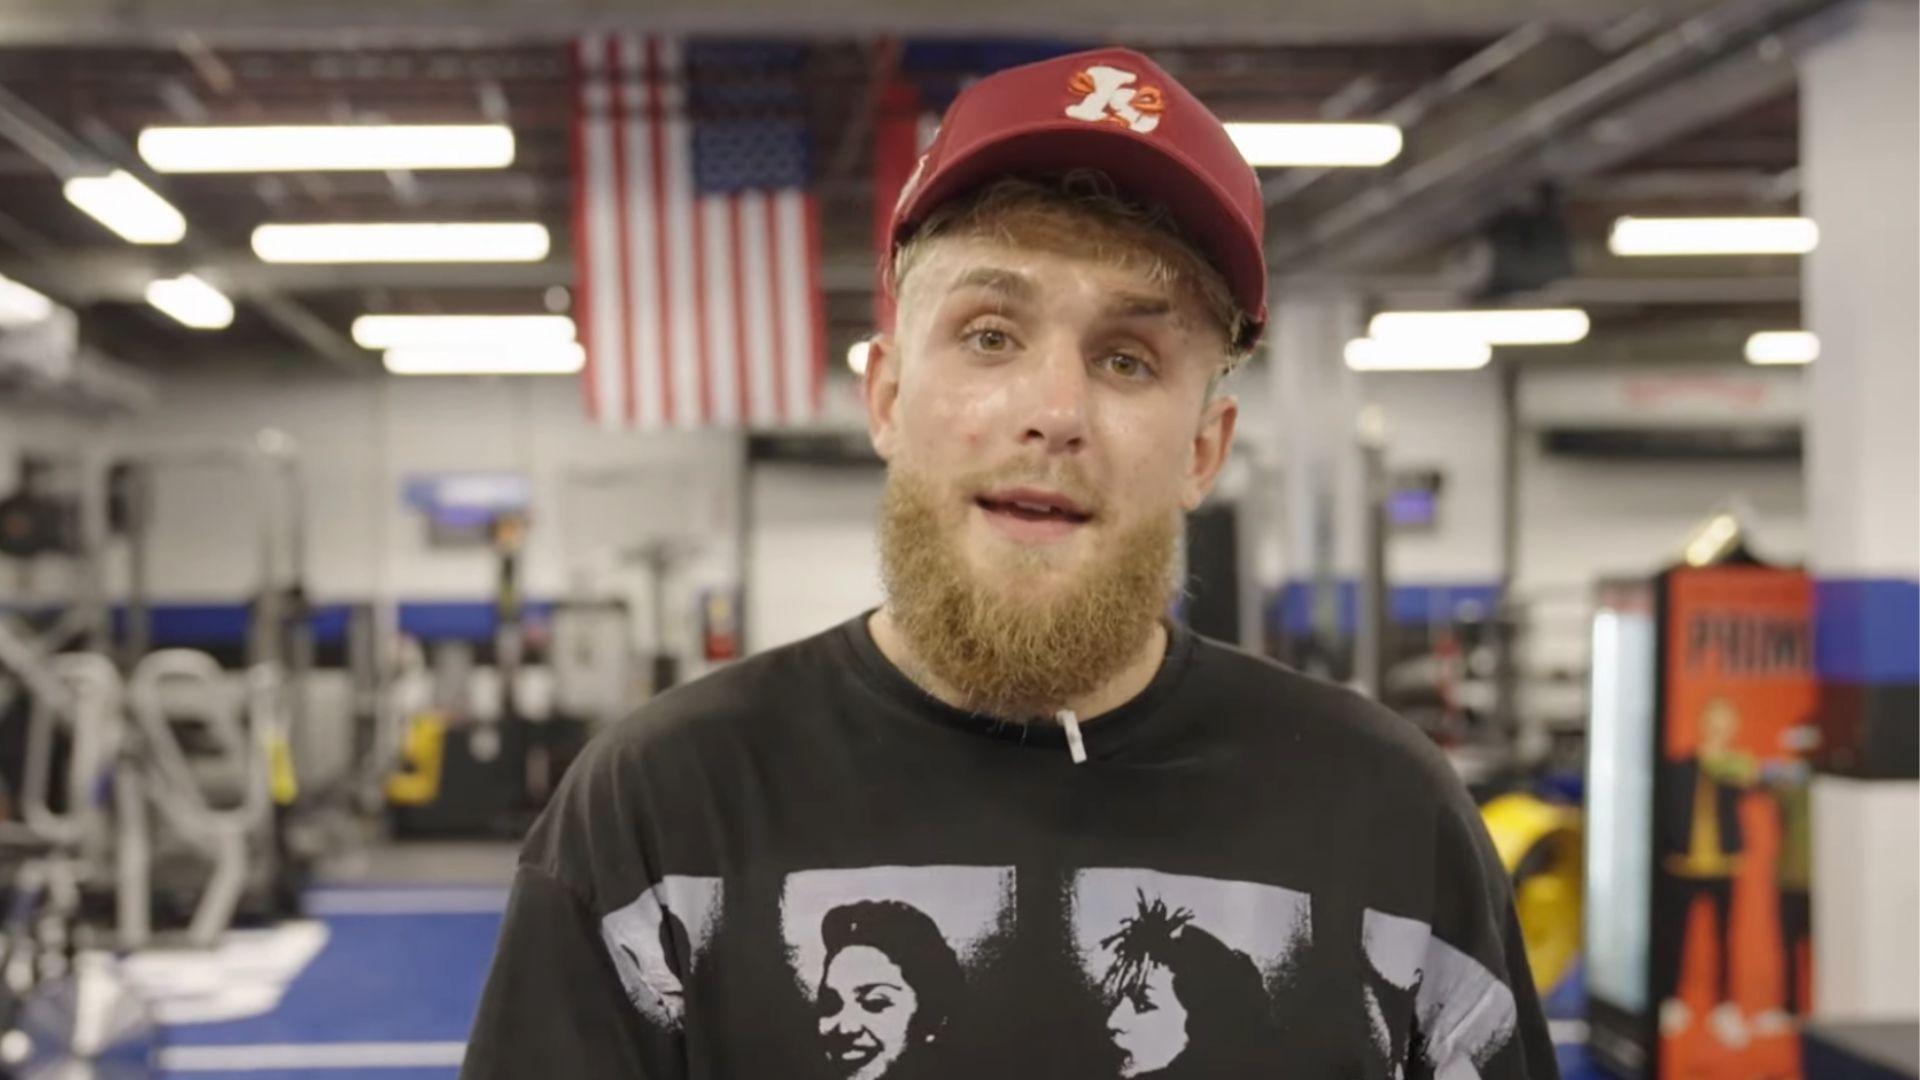 Jake Paul talking inside boxing gym with black shirt and red hat